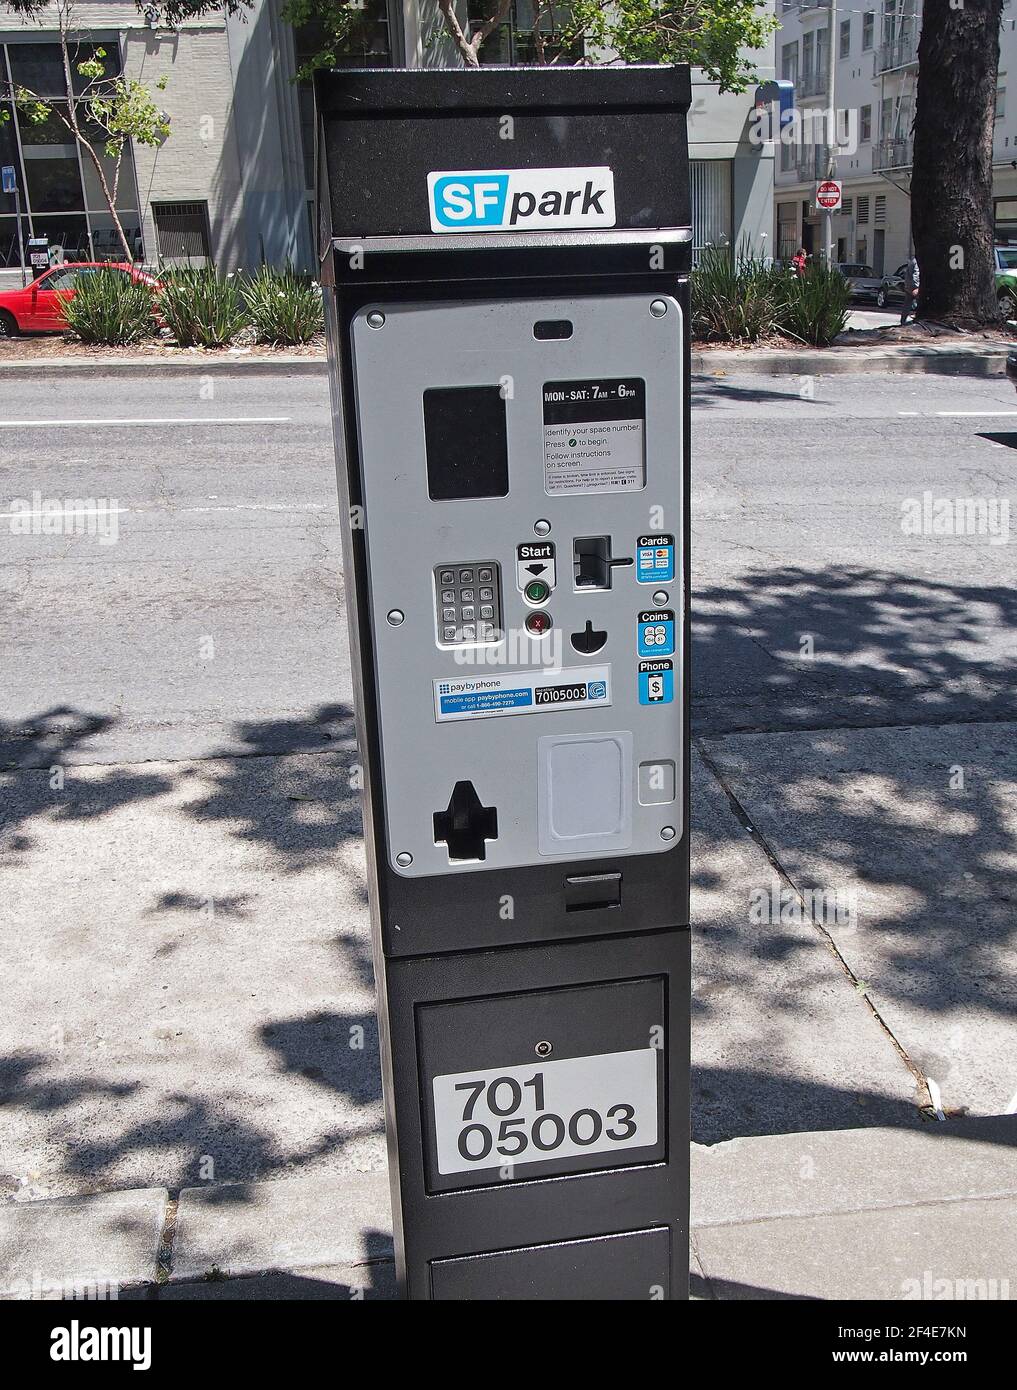 SF Park parking payment meter in San Francisco, California Stock Photo